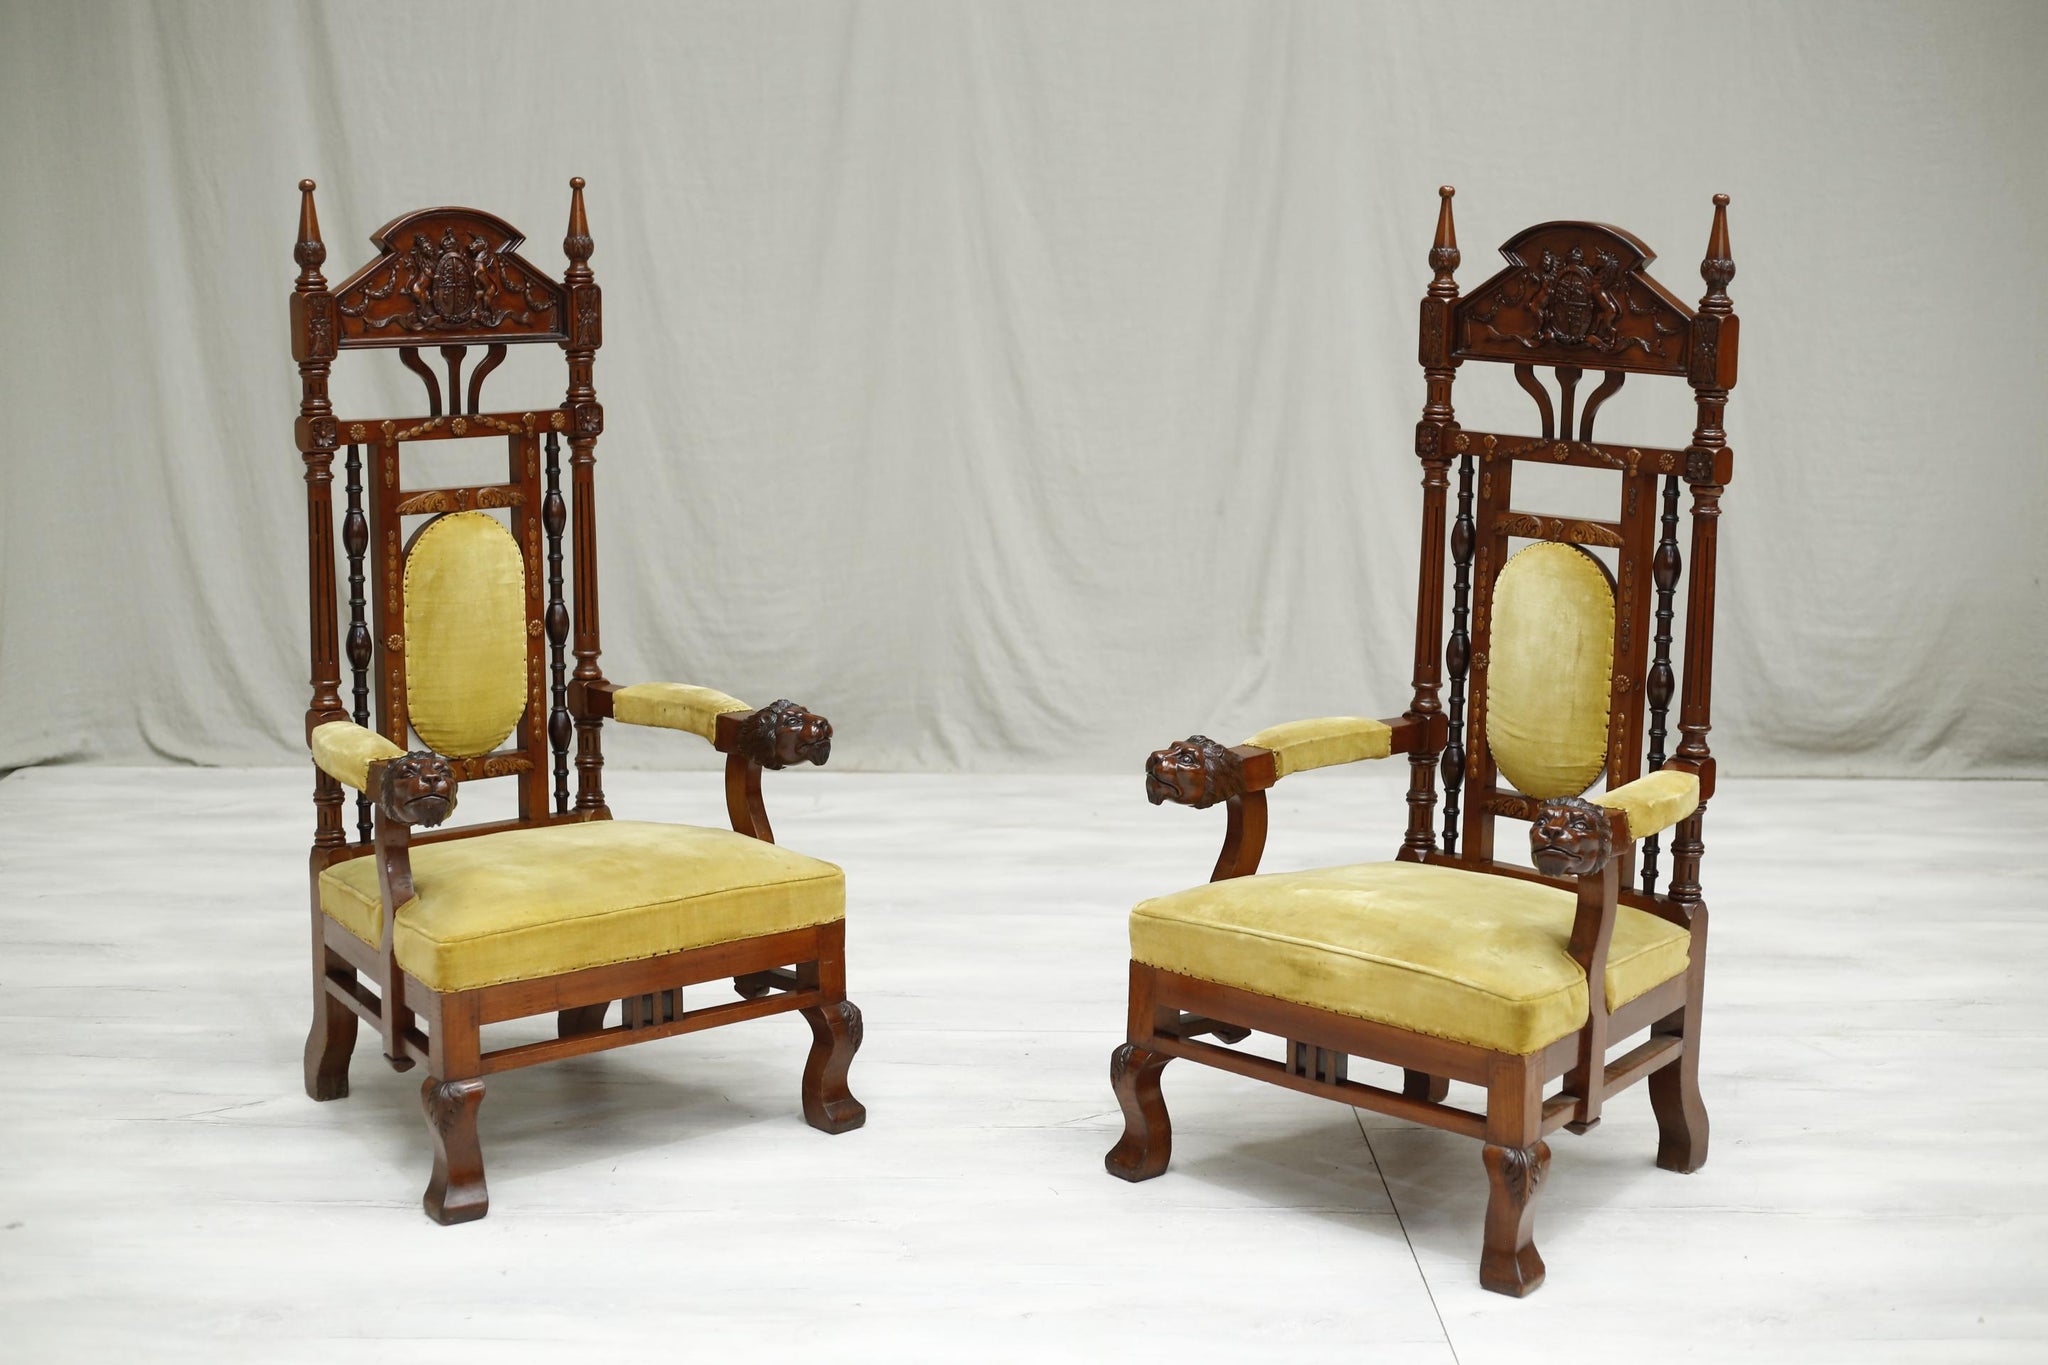 Pair of Antique colonial armchairs - TallBoy Interiors